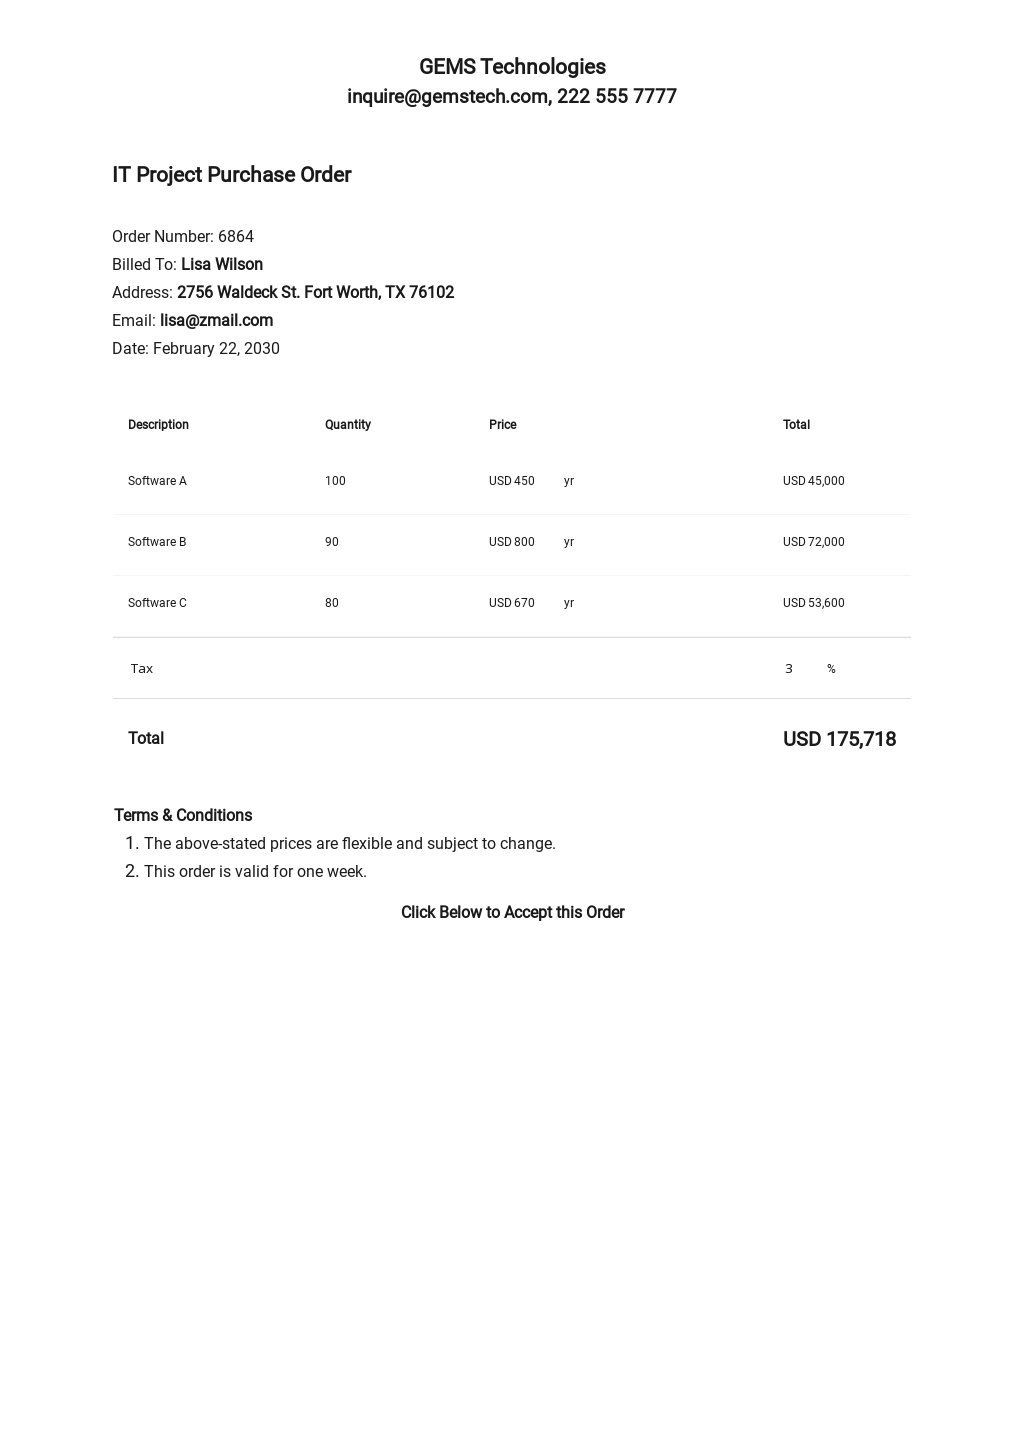 IT Project Purchase Order Template.jpe